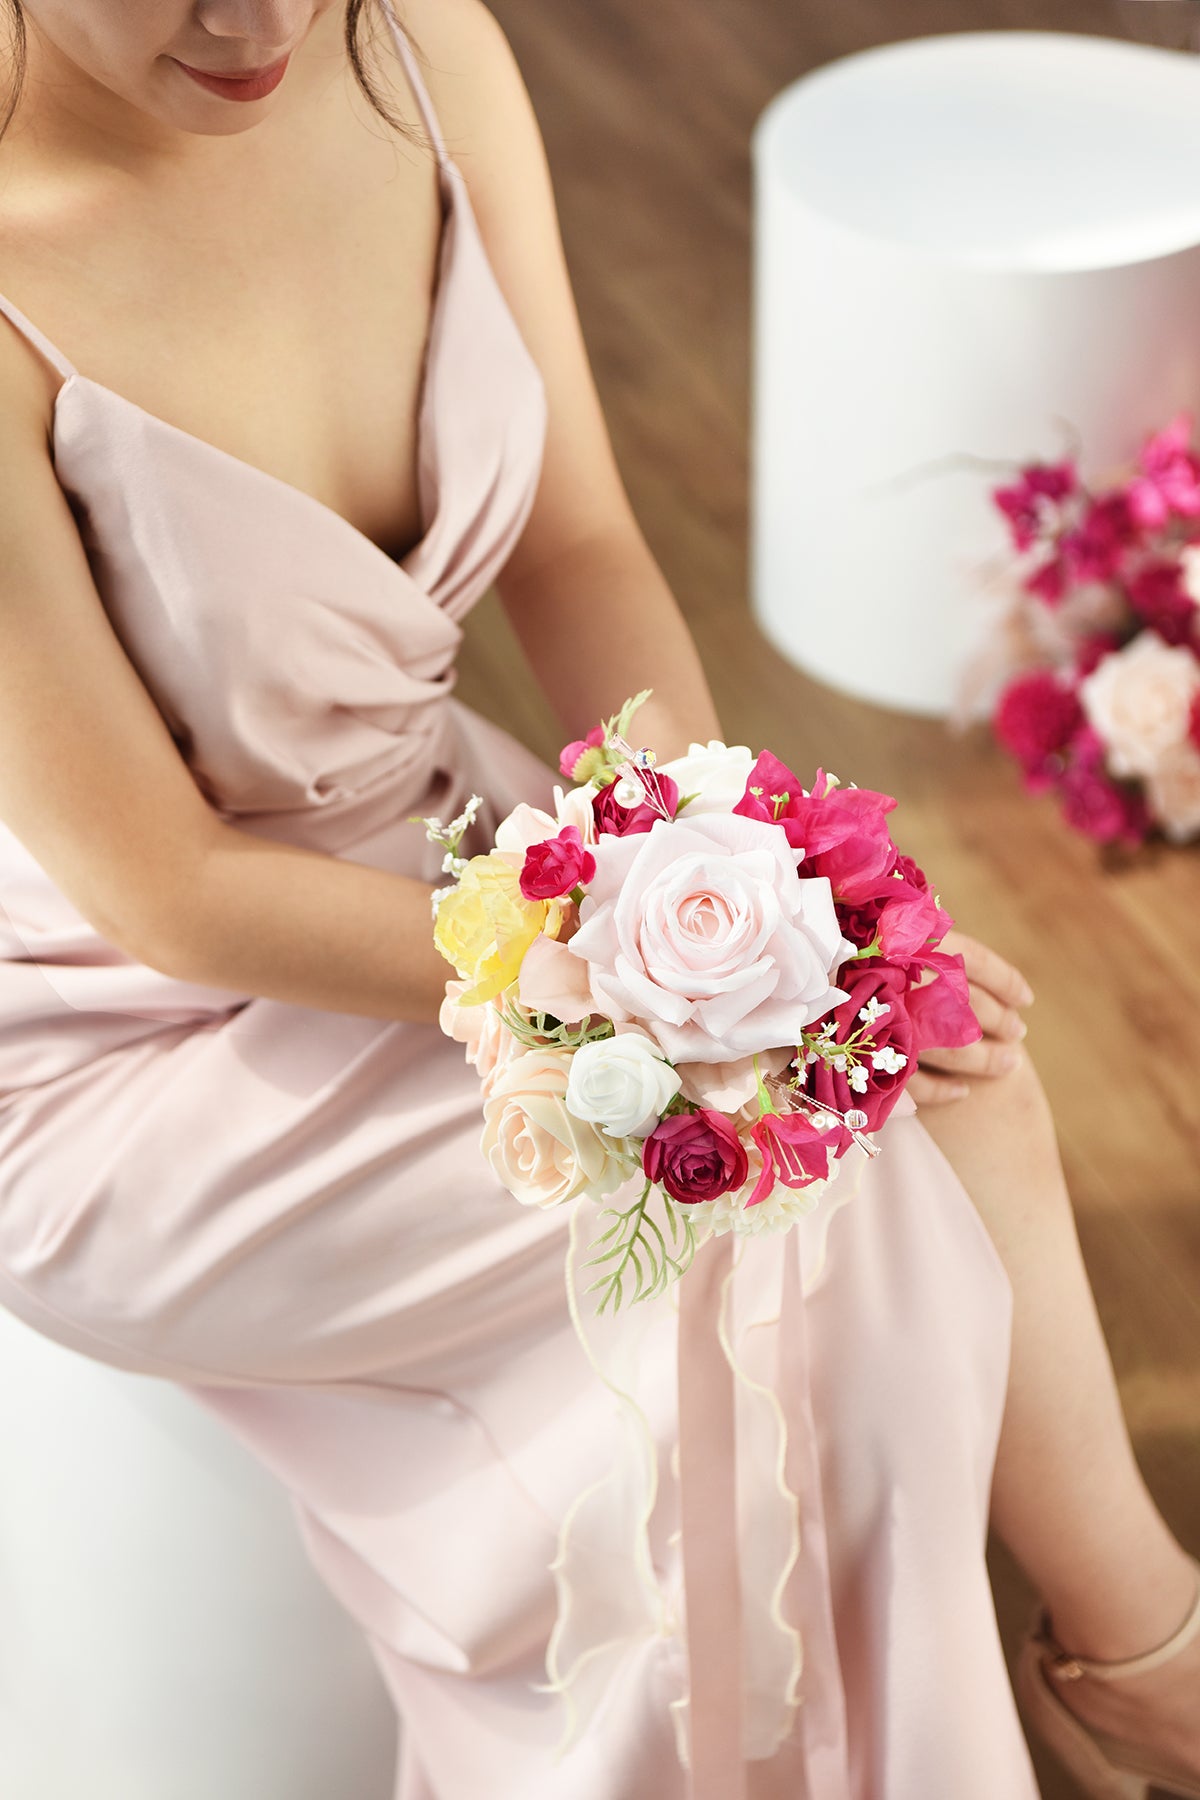 Maid of Honor & Bridesmaid Bouquets in Passionate Pink & Blush